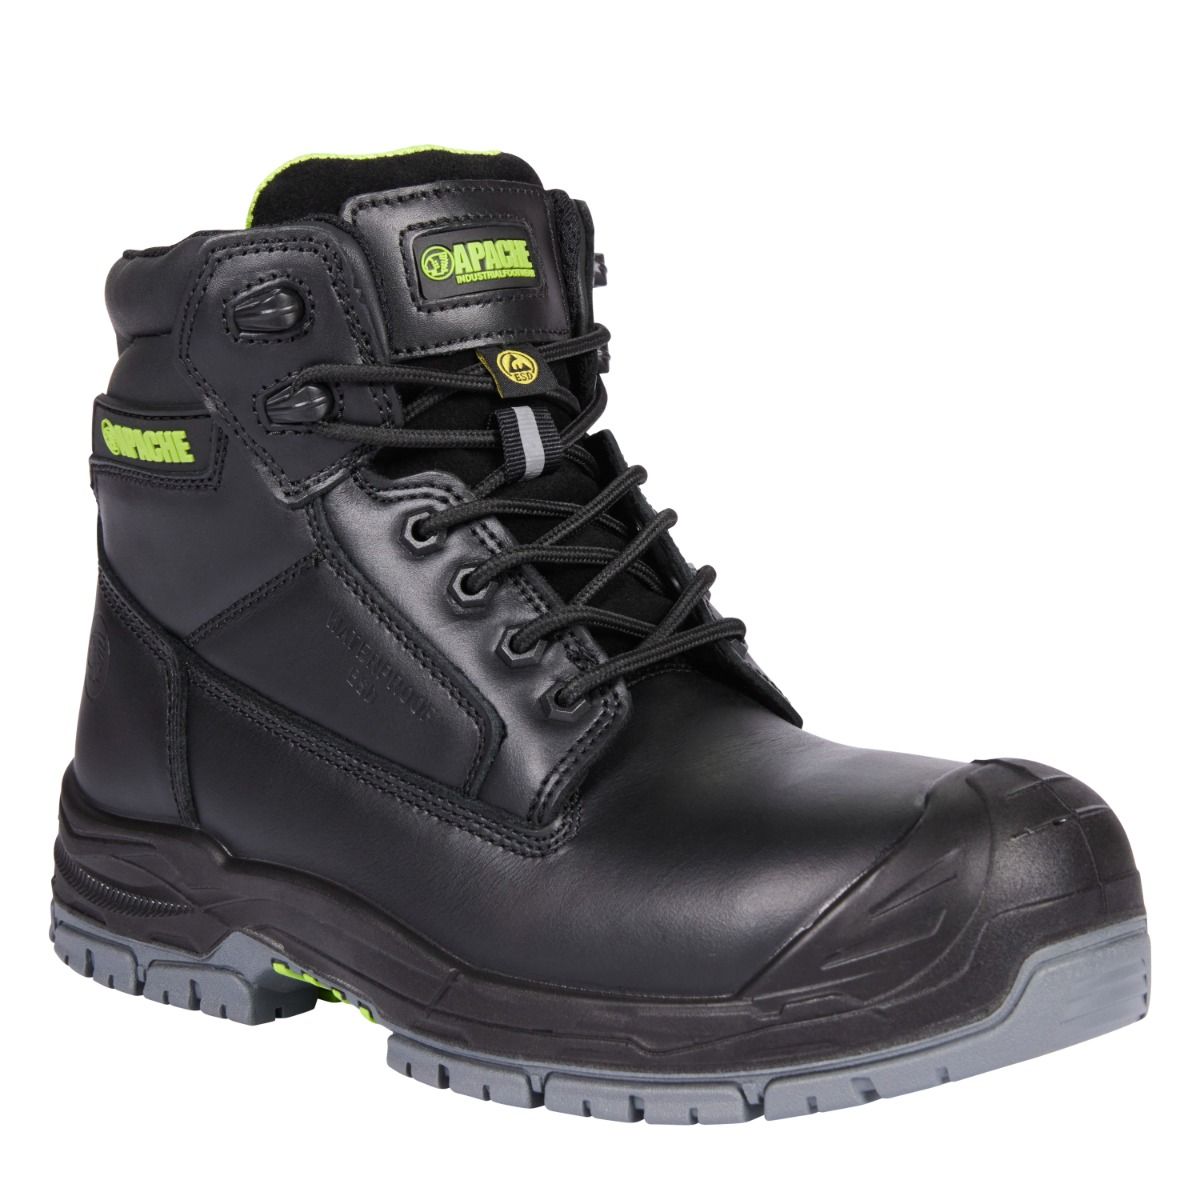 Apache Cranbrook Boots - Safety Solutions